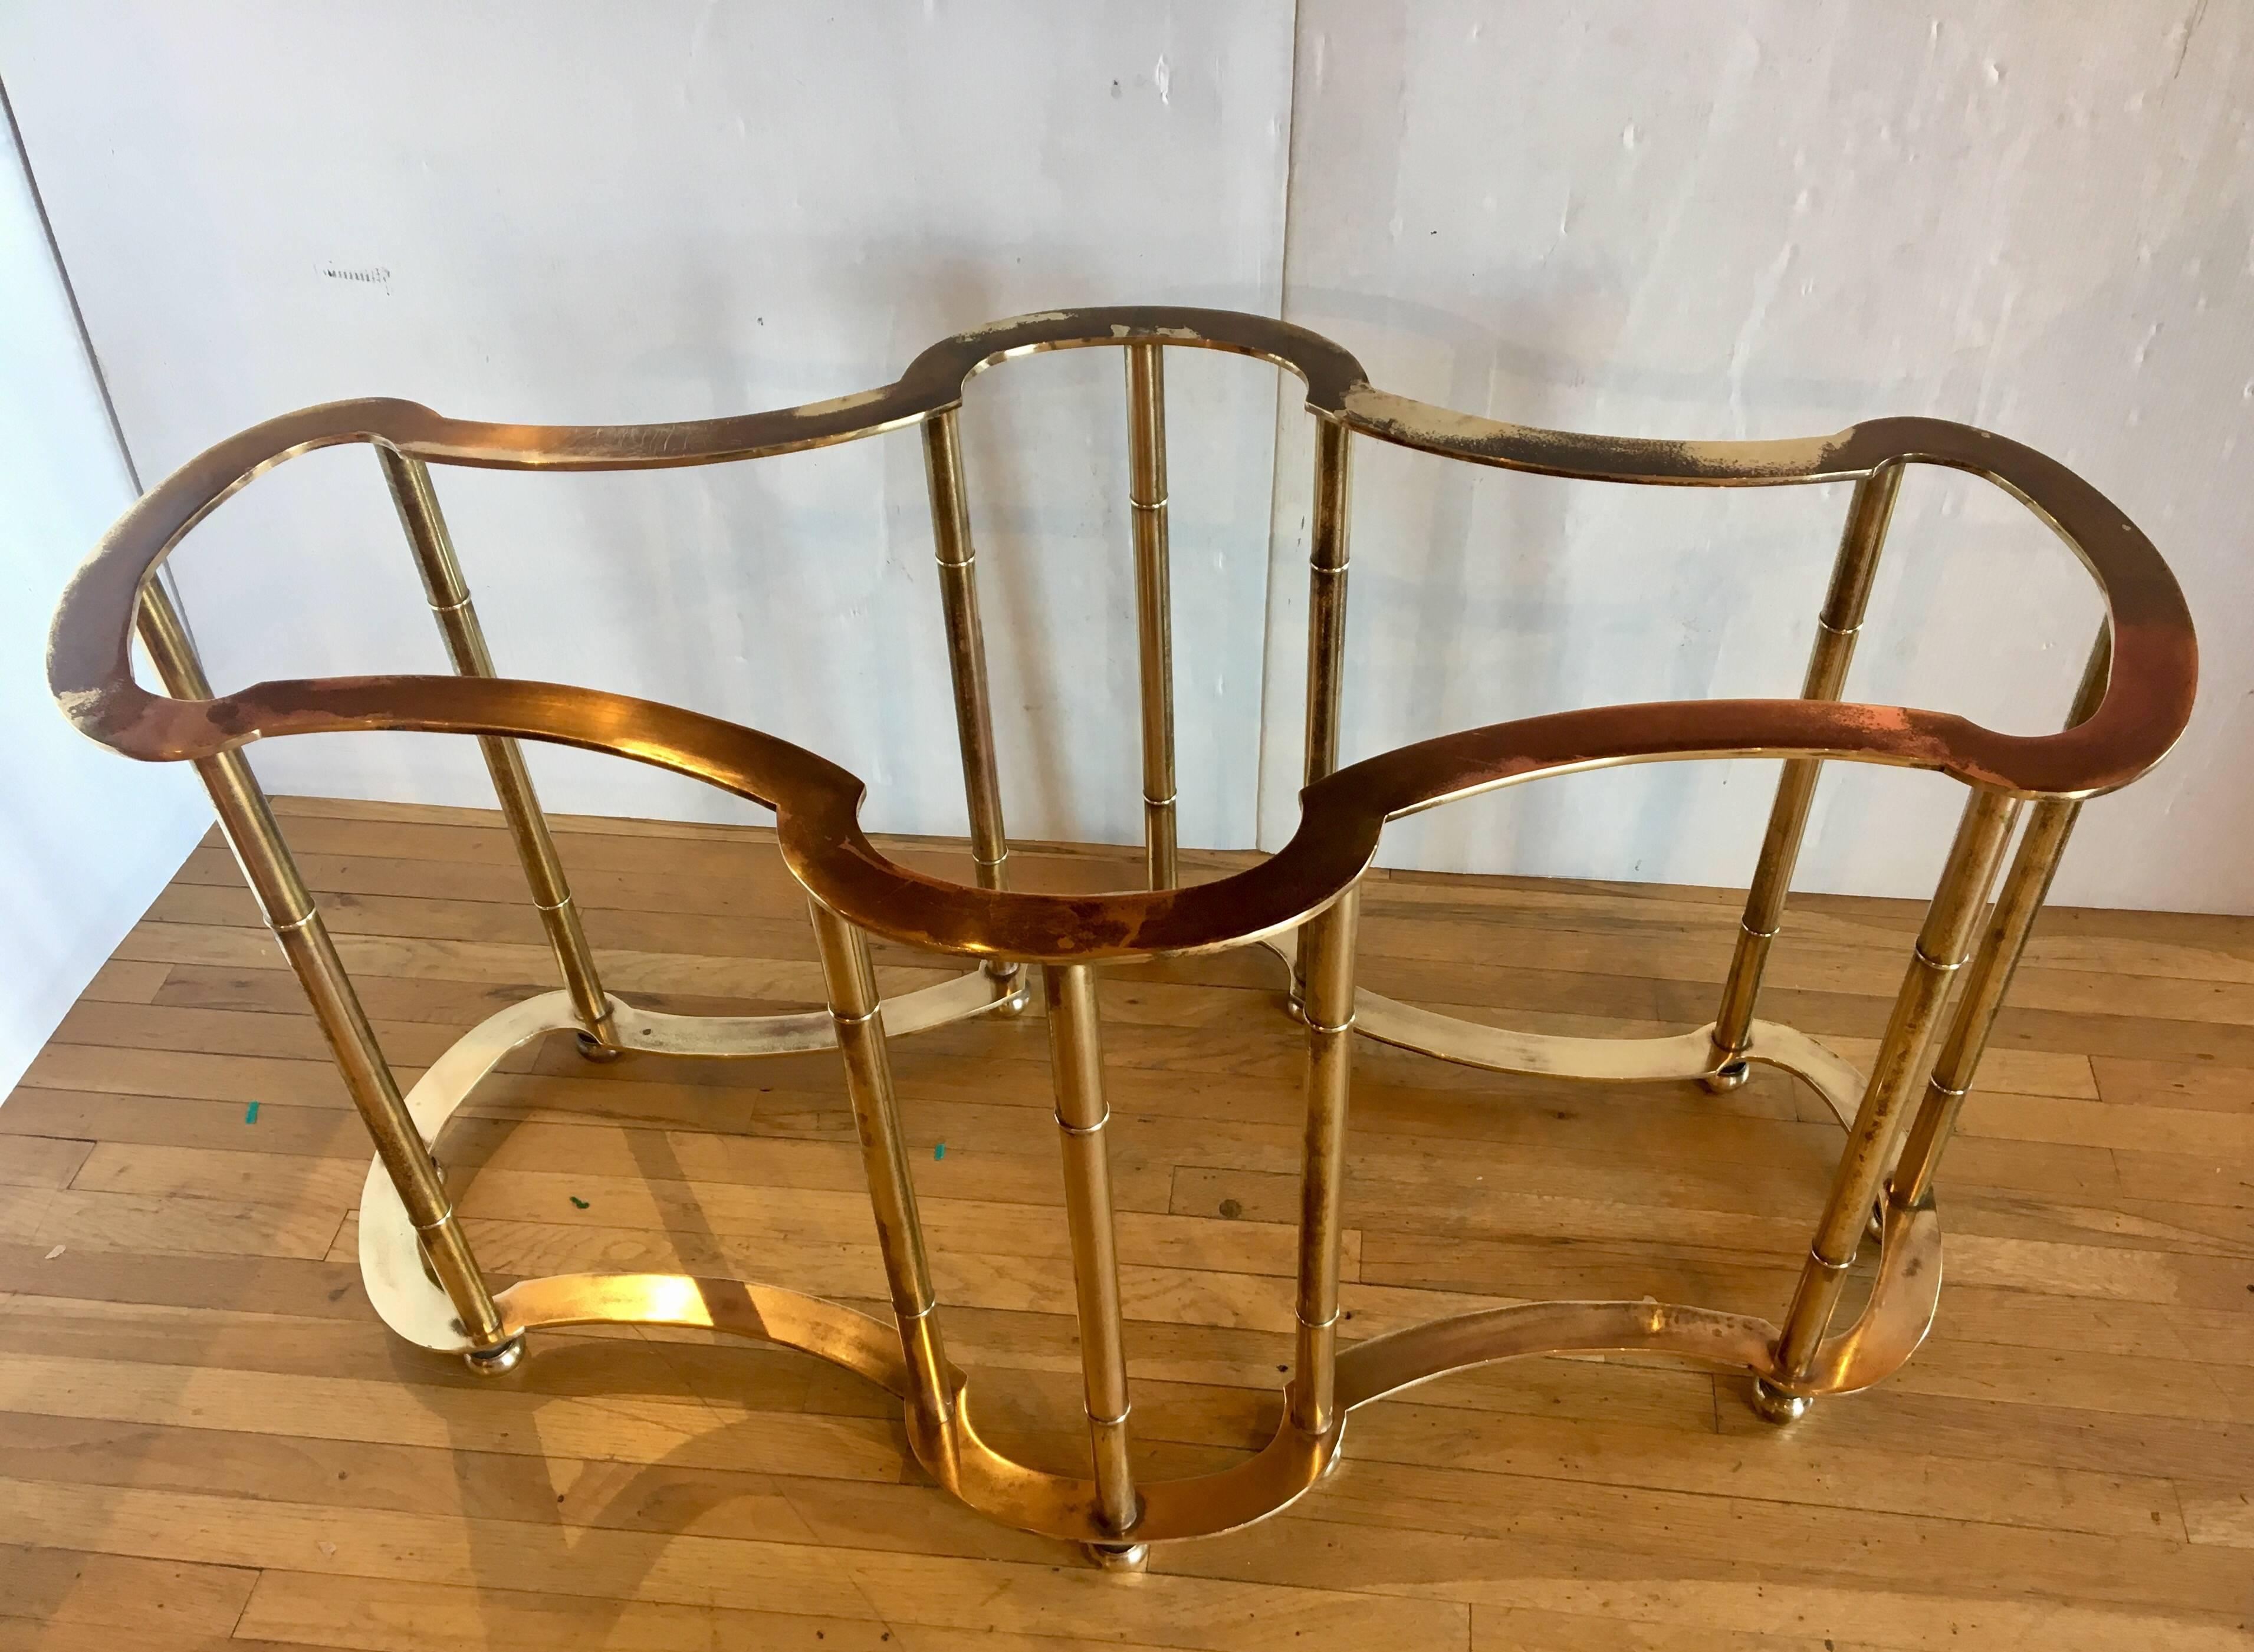 Beautiful polished brass racetrack dining table base by Mastercraft, circa 1960s. Polished brass with some patinated areas, incredible detail, massive and heavy; it can support a large piece of glass (rectangle or oval) or even a slab of marble as a